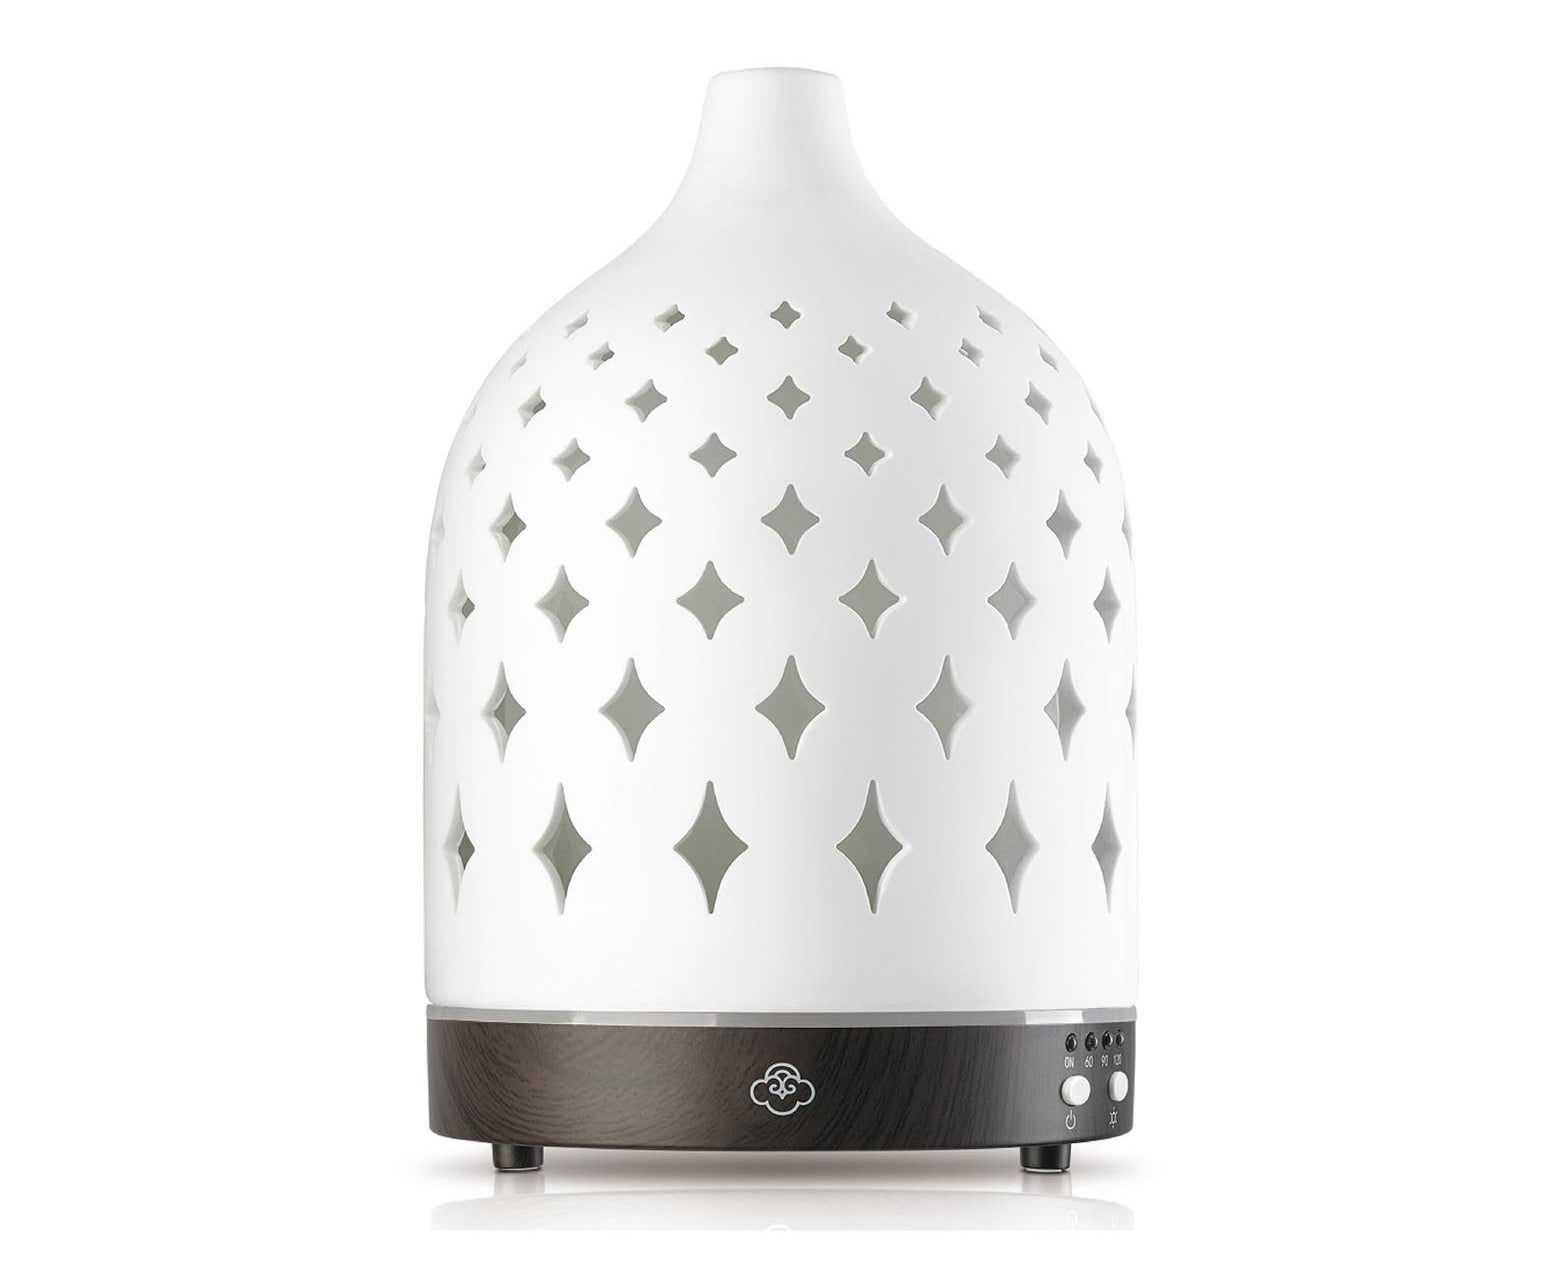 The white diffuser with diamond-shaped cutouts on the side